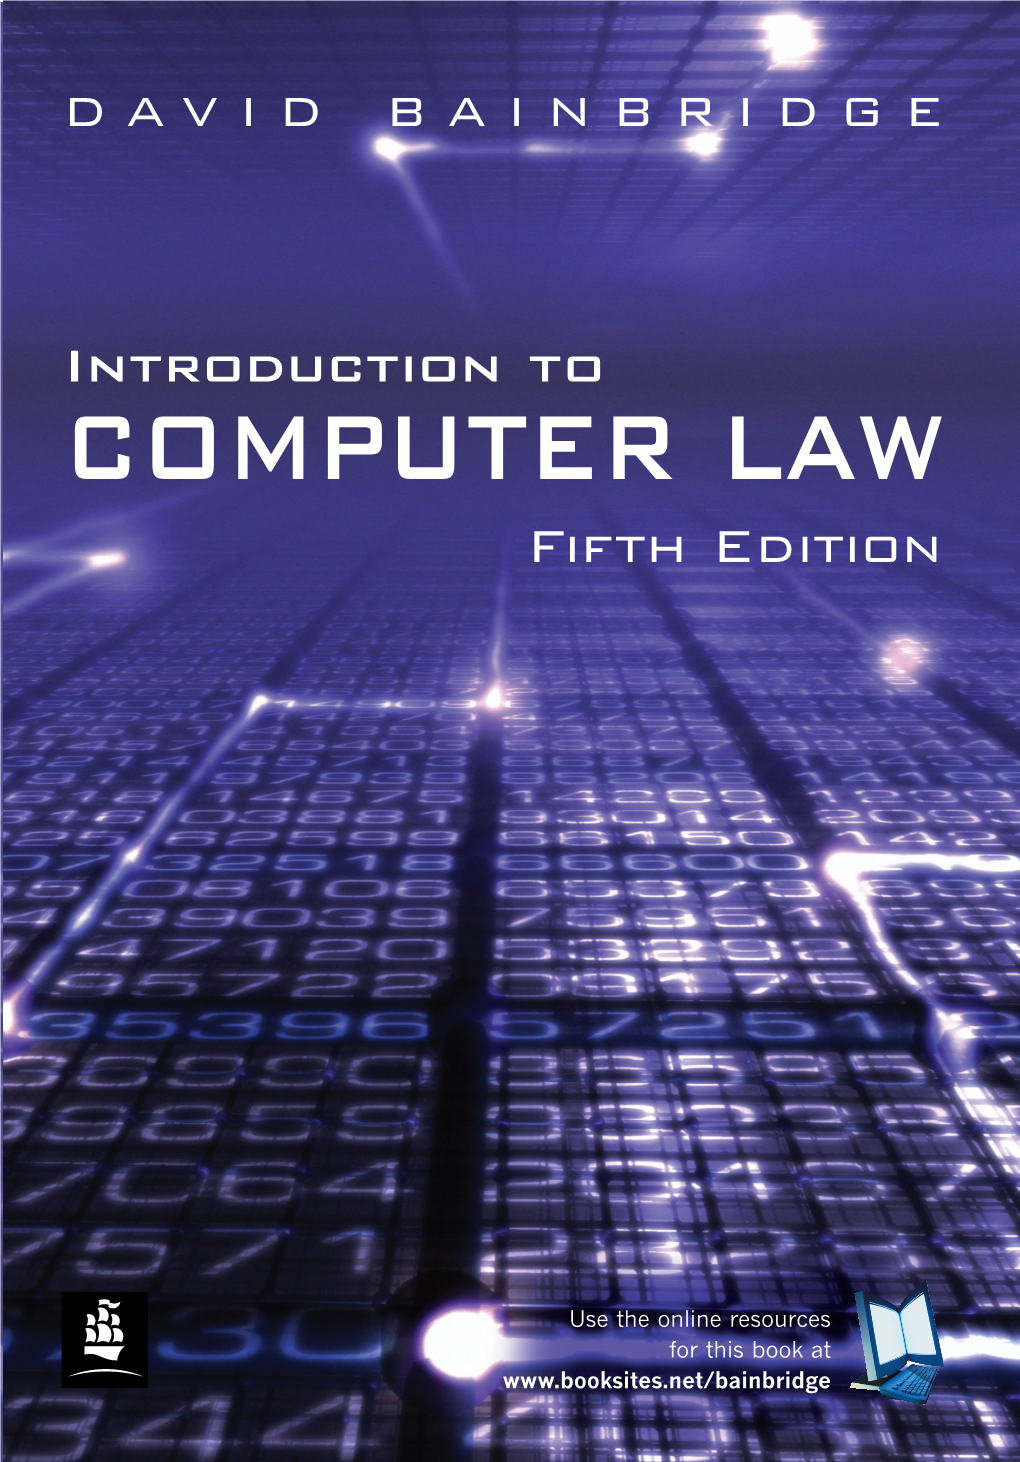 COMPUTER LAW DA Introduction to Computer Law Explains the Law Clearly and Makes It Accessible to a Wide Audience